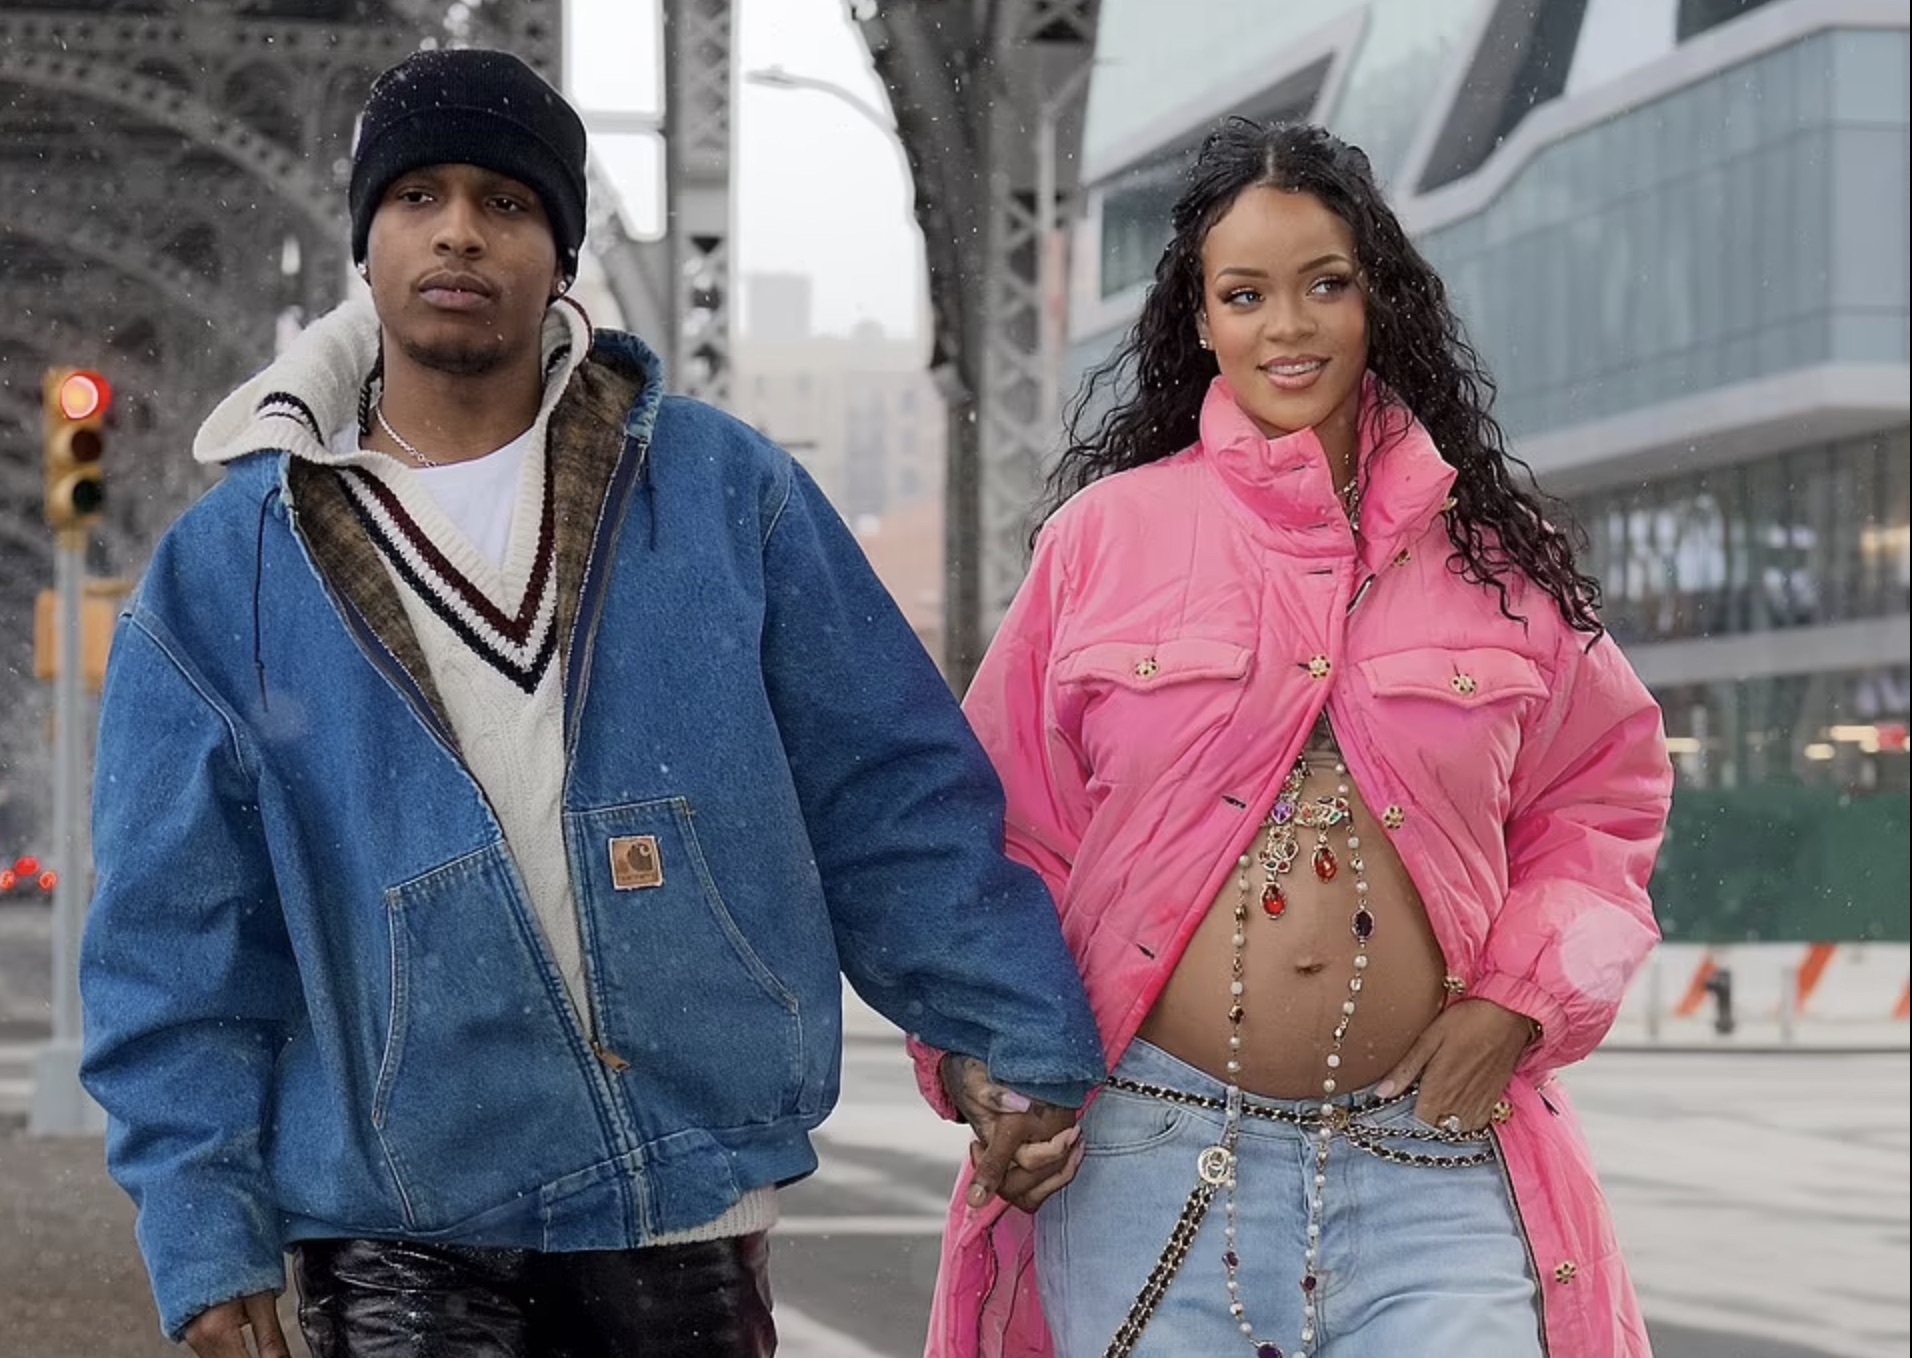 46 Facts about A$AP Rocky, the rapper who got Rihanna pregnant pic photo